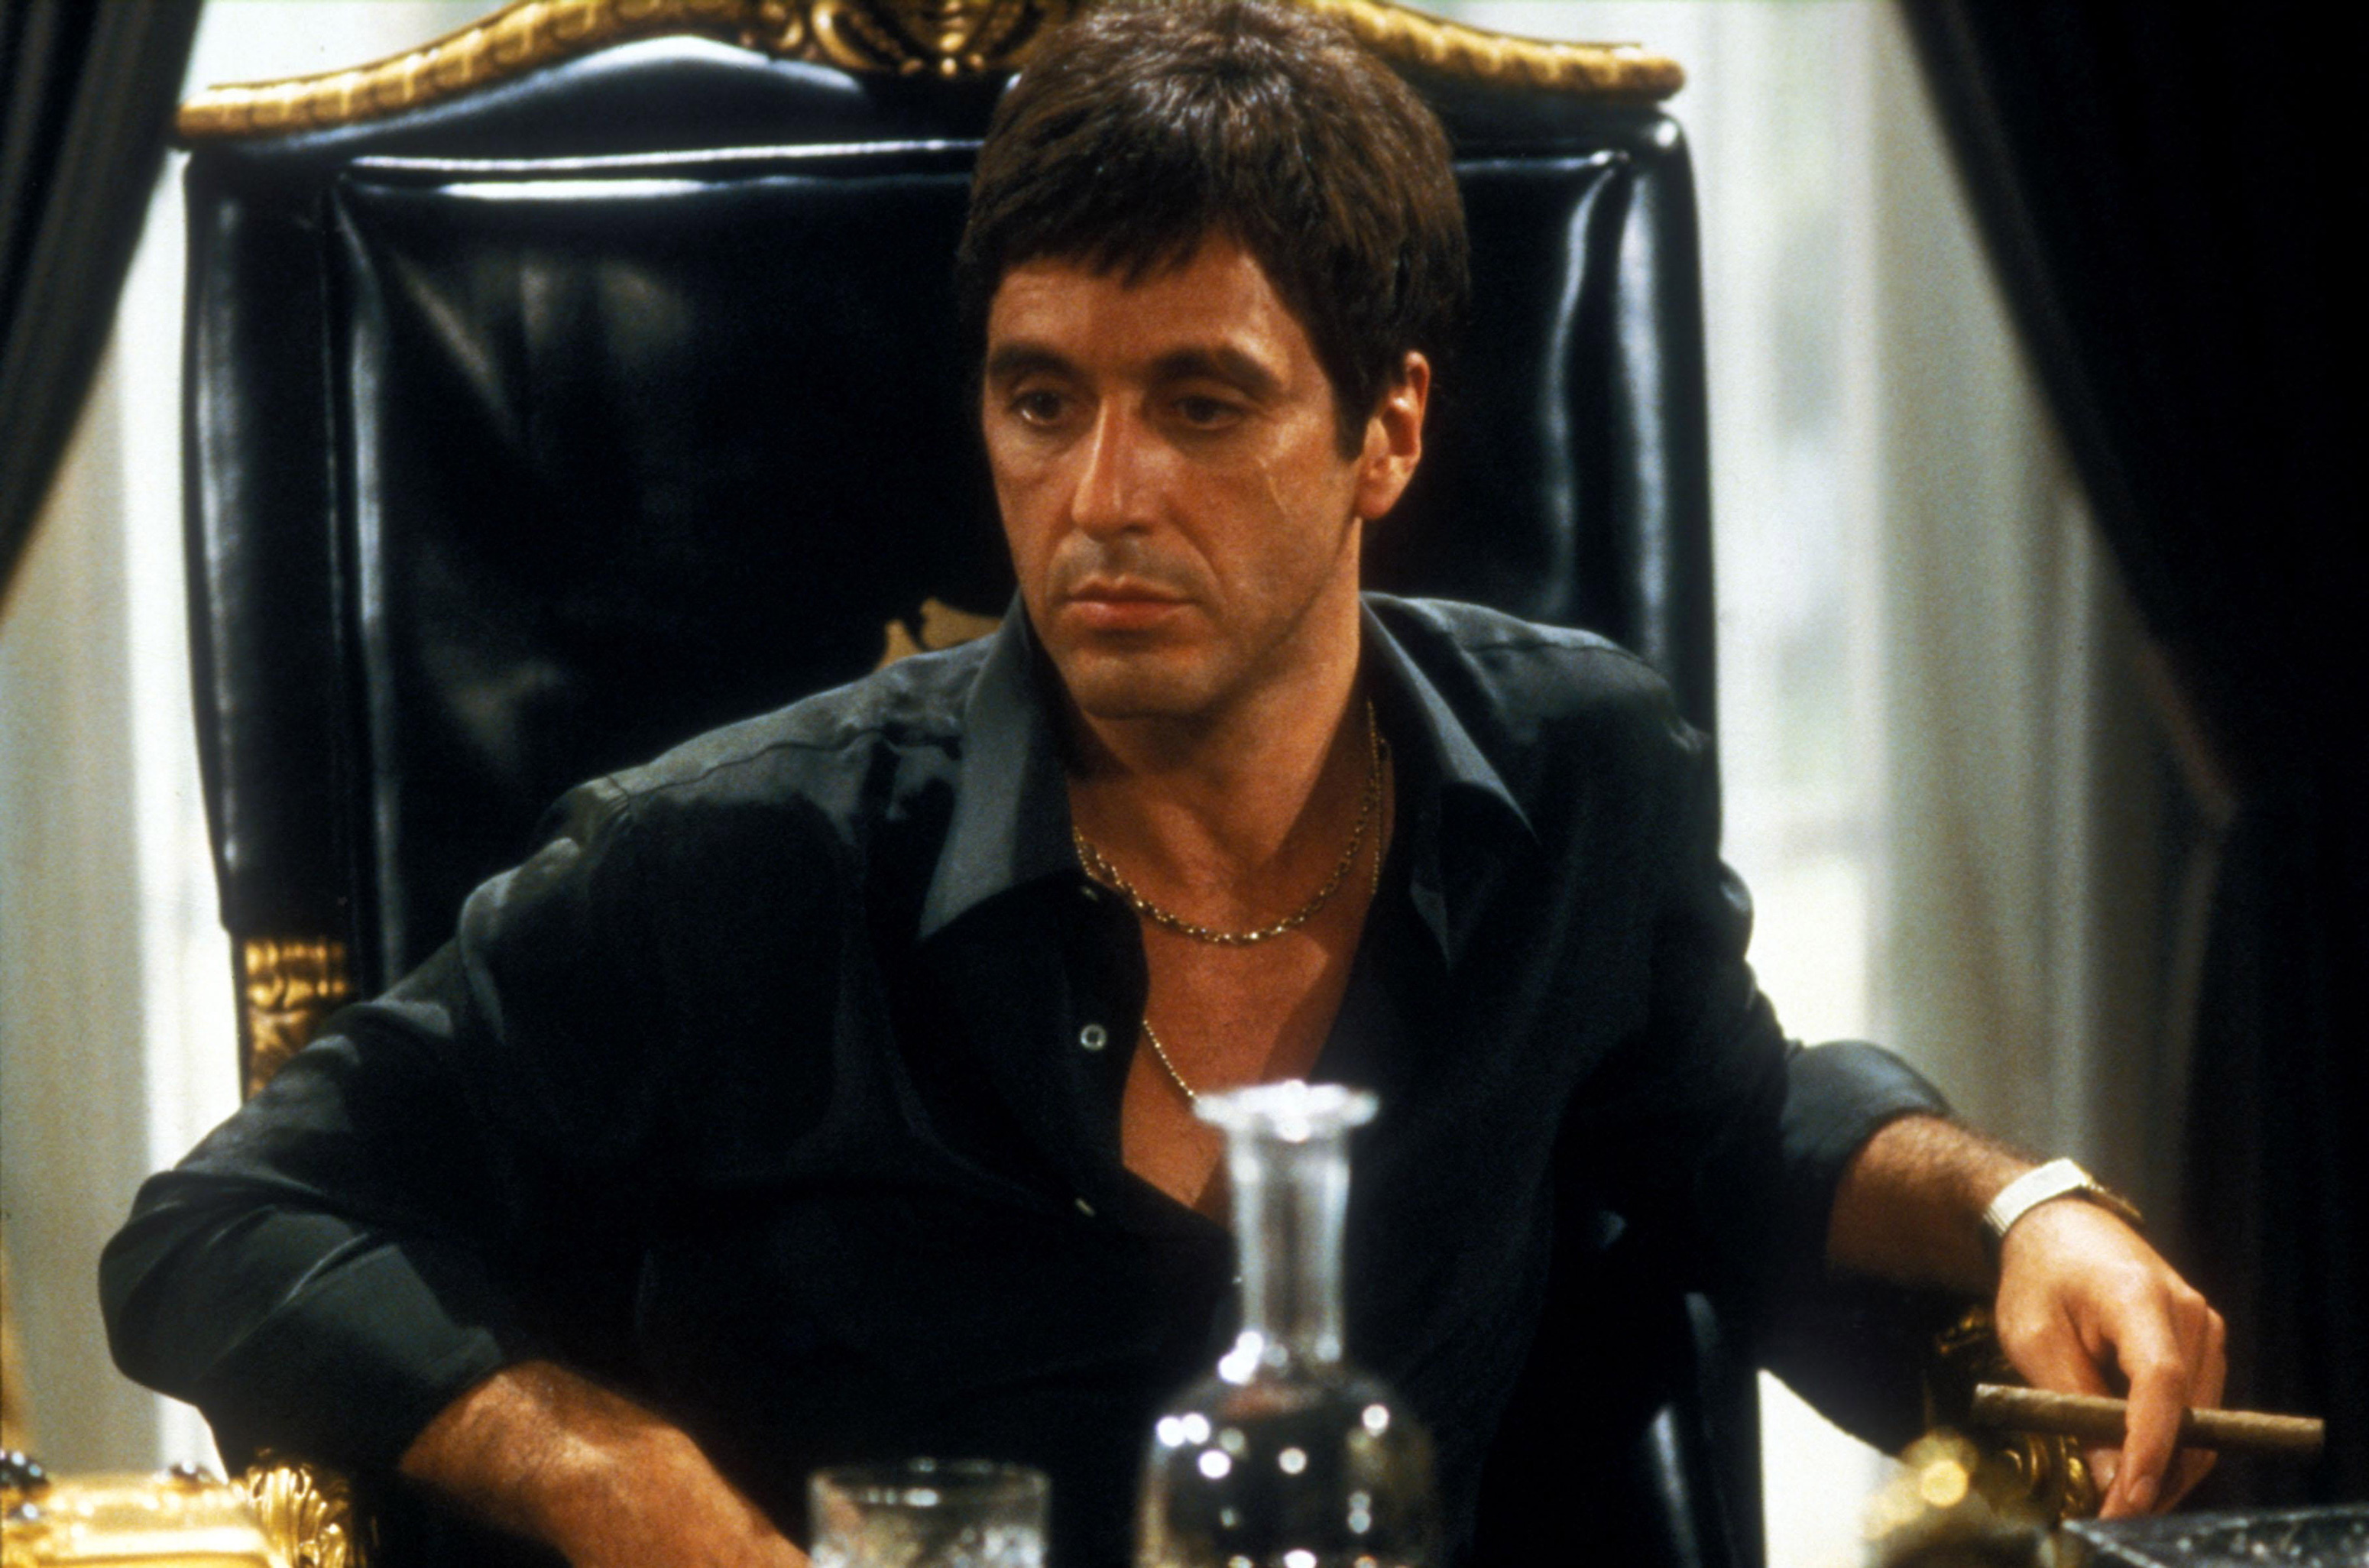 www.kobal-collection.com Title: SCARFACE (1983) ¥ Pers: PACINO, AL ¥ Year: 1983 ¥ Dir: DE PALMA, BRIAN ¥ Ref: SCA014CS ¥ Credit: [ UNIVERSAL / THE KOBAL COLLECTION ] SCARFACE (1983) ,   January 1, 1983 Photo by Kobal/UNIVERSAL/The Kobal Collection/WireImage.com To license this image (10616065), contact The Kobal Collection/WireImage.com